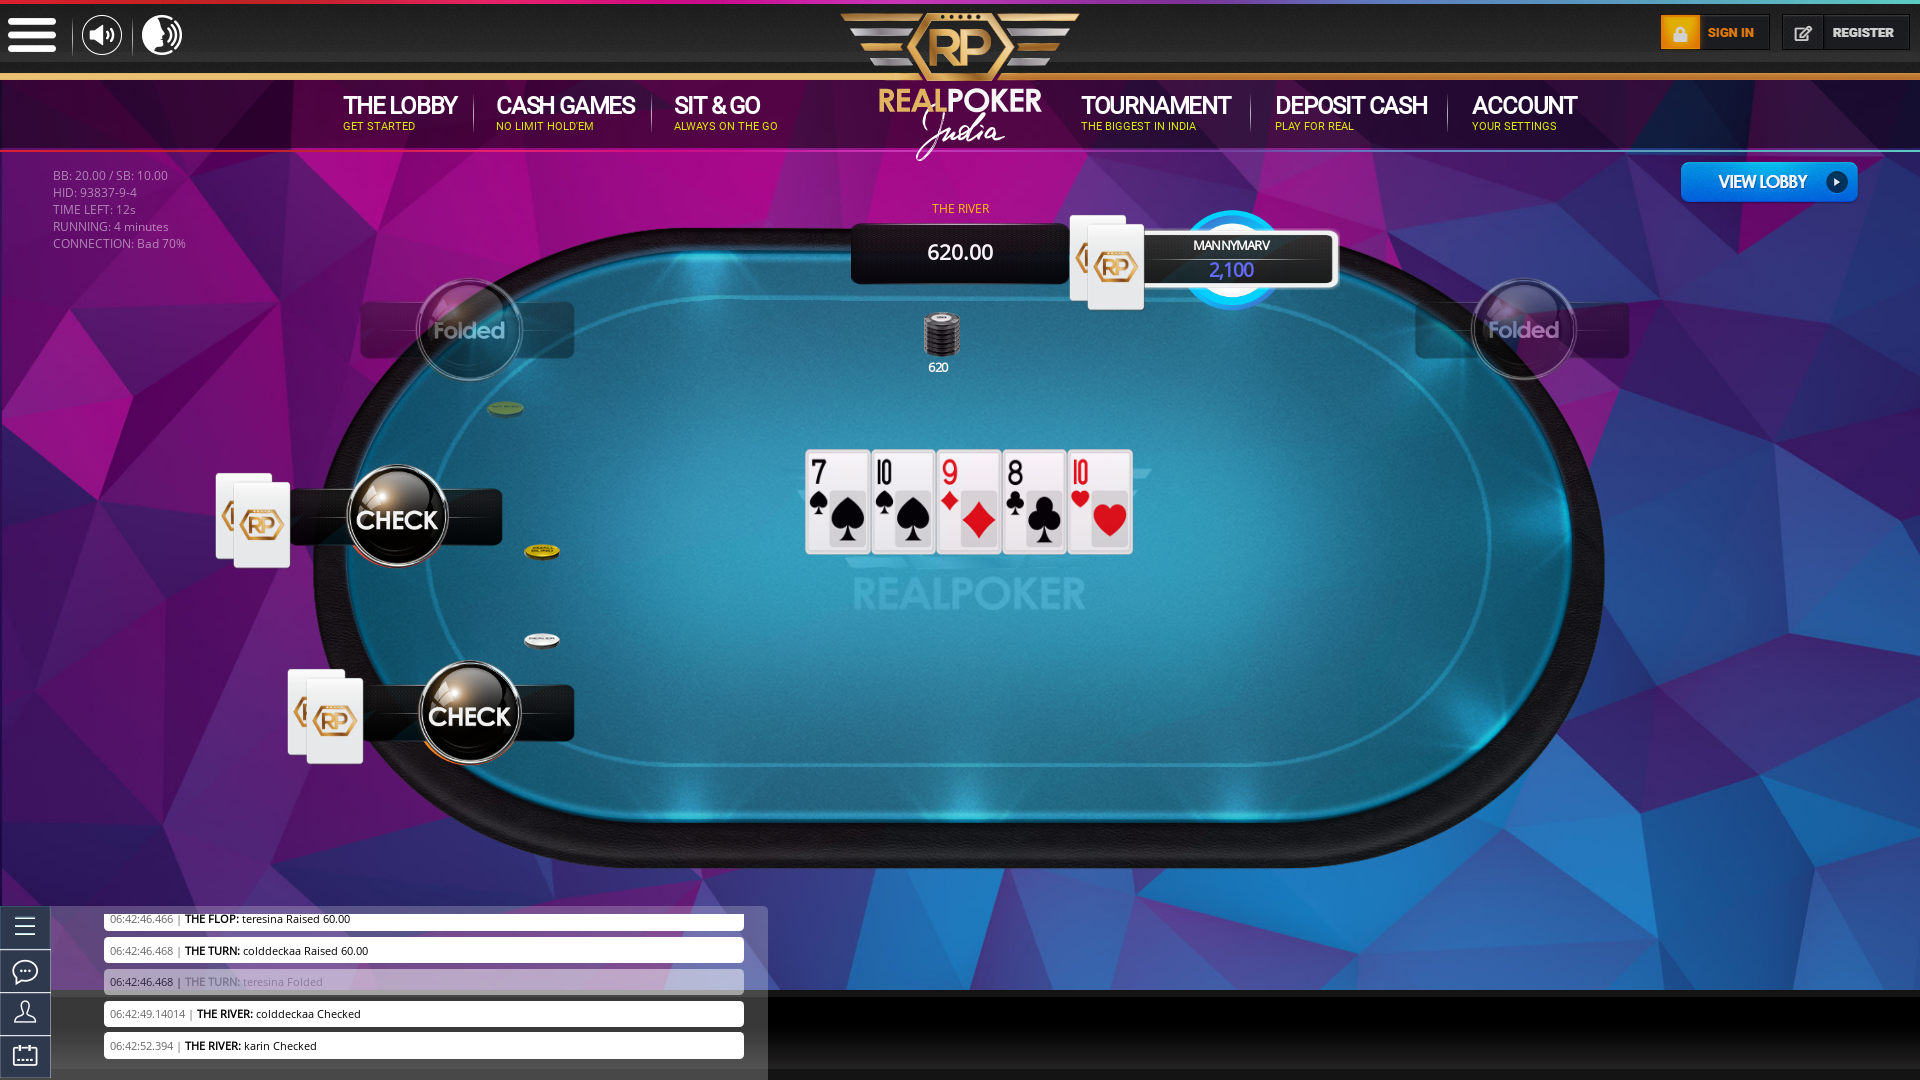 10 player texas holdem table at real poker with the table id 93837